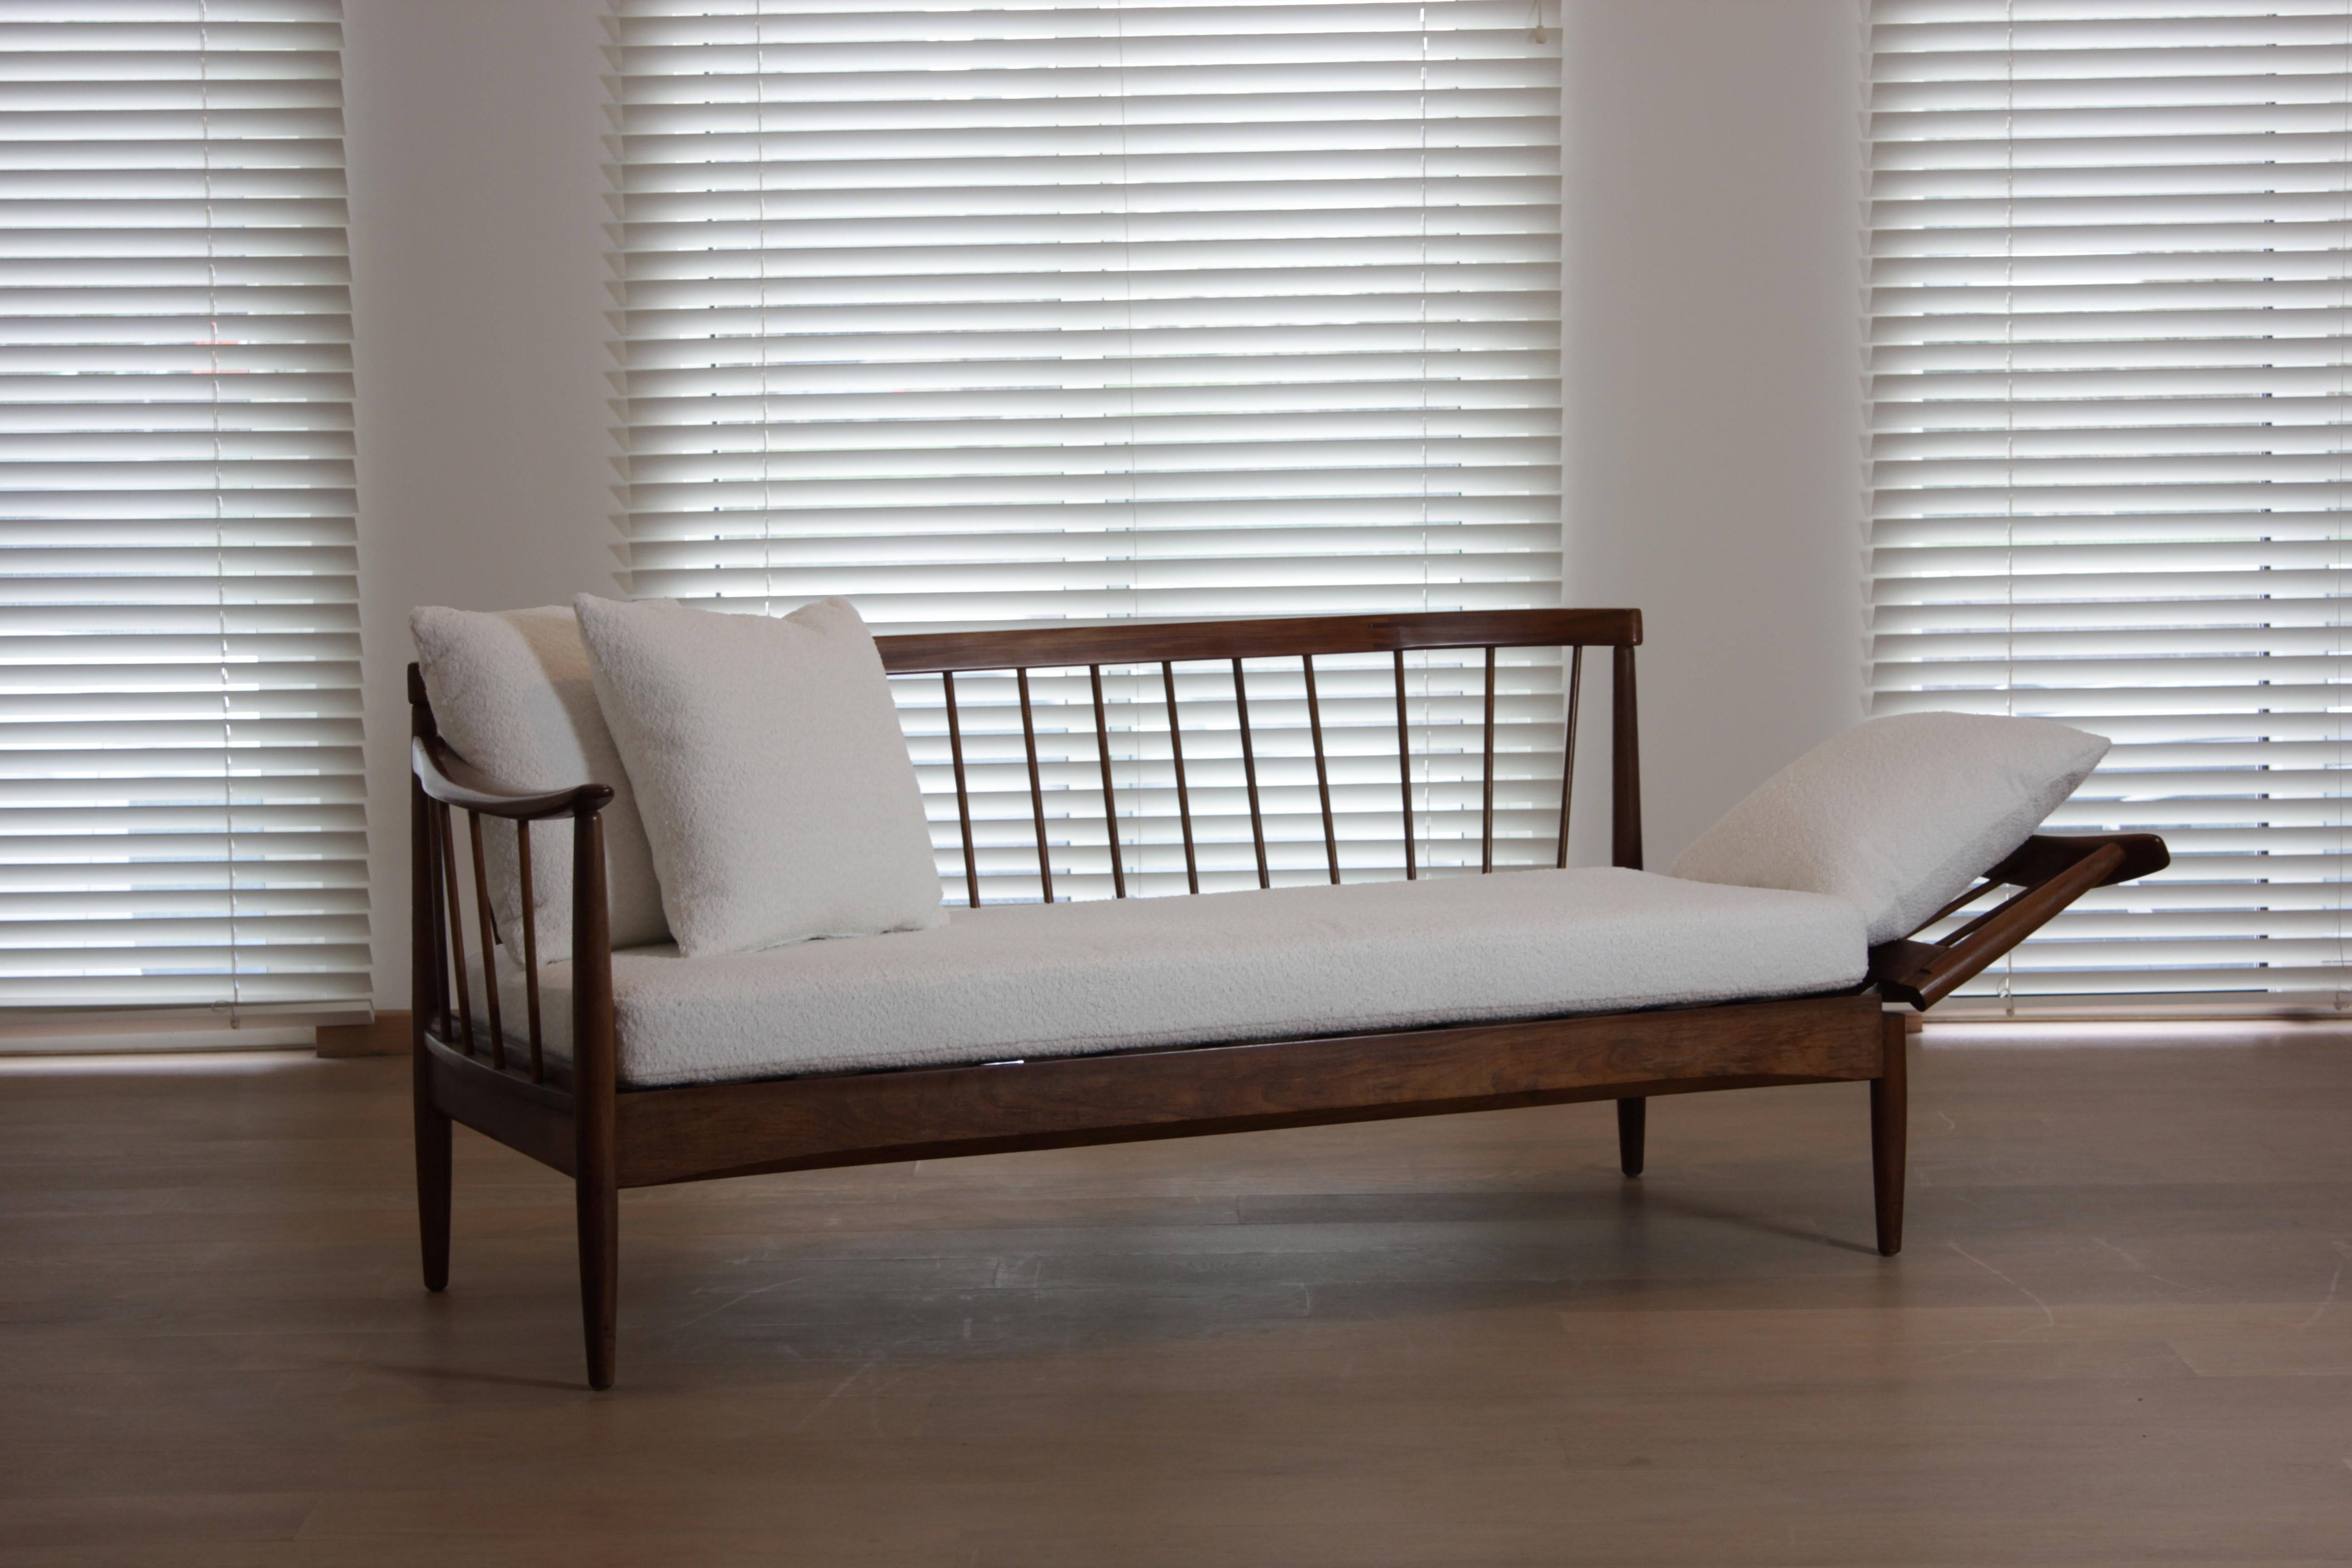 Mid 20th Century Modern Daybed by Greaves & Thomas, 1960s For Sale 5